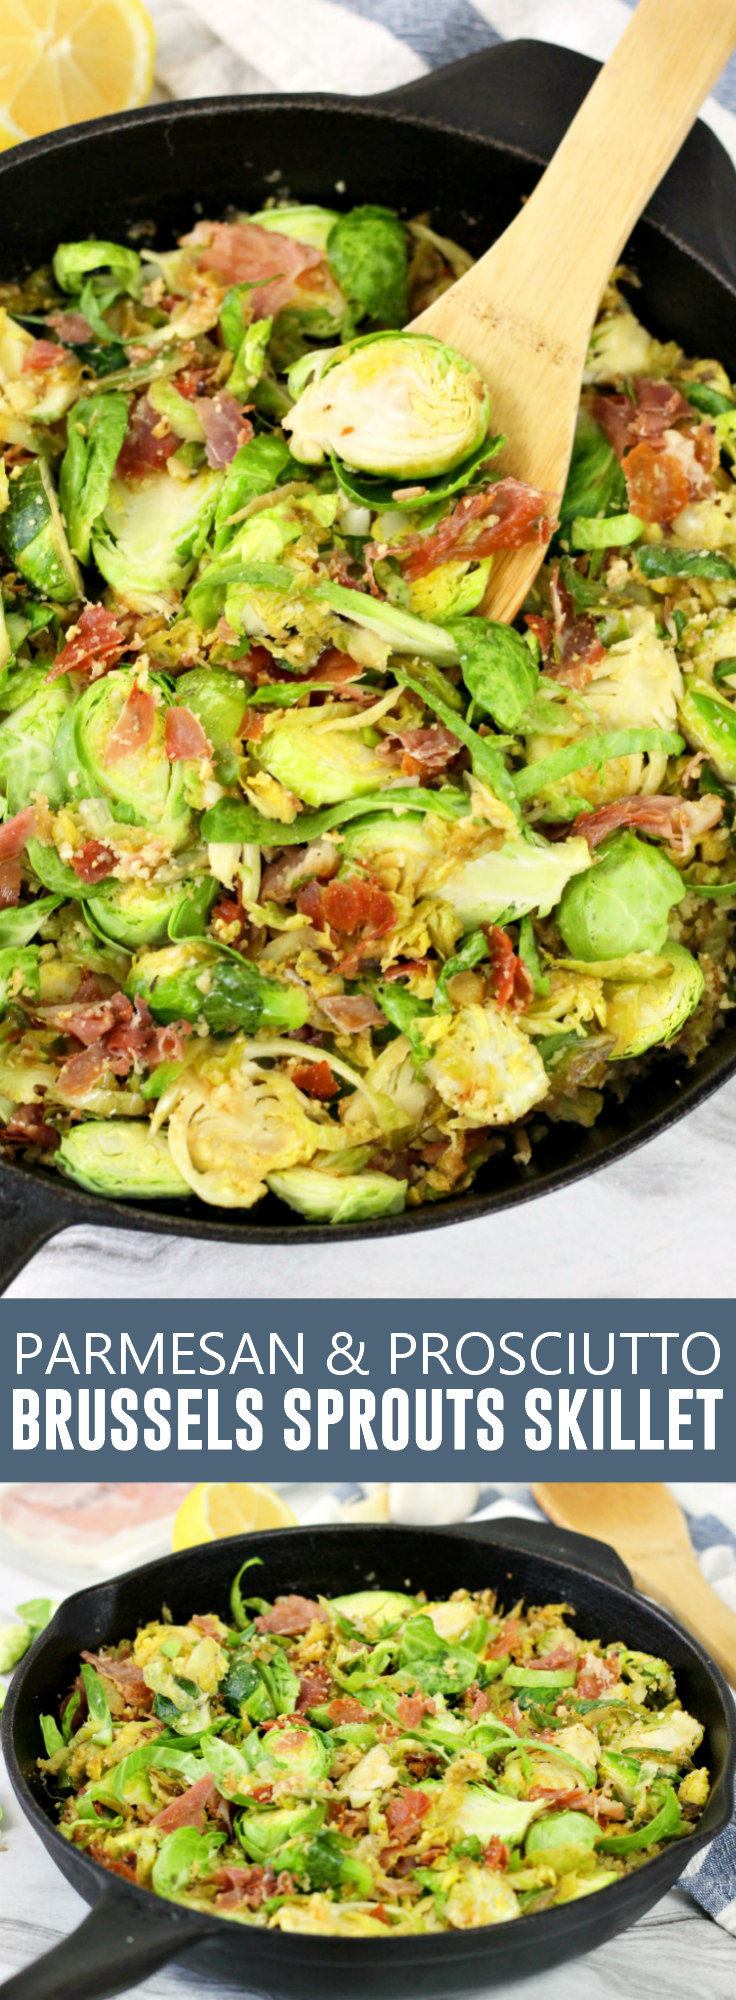 Parmesan and Prosciutto Brussels Sprouts Skillet pinnable image.